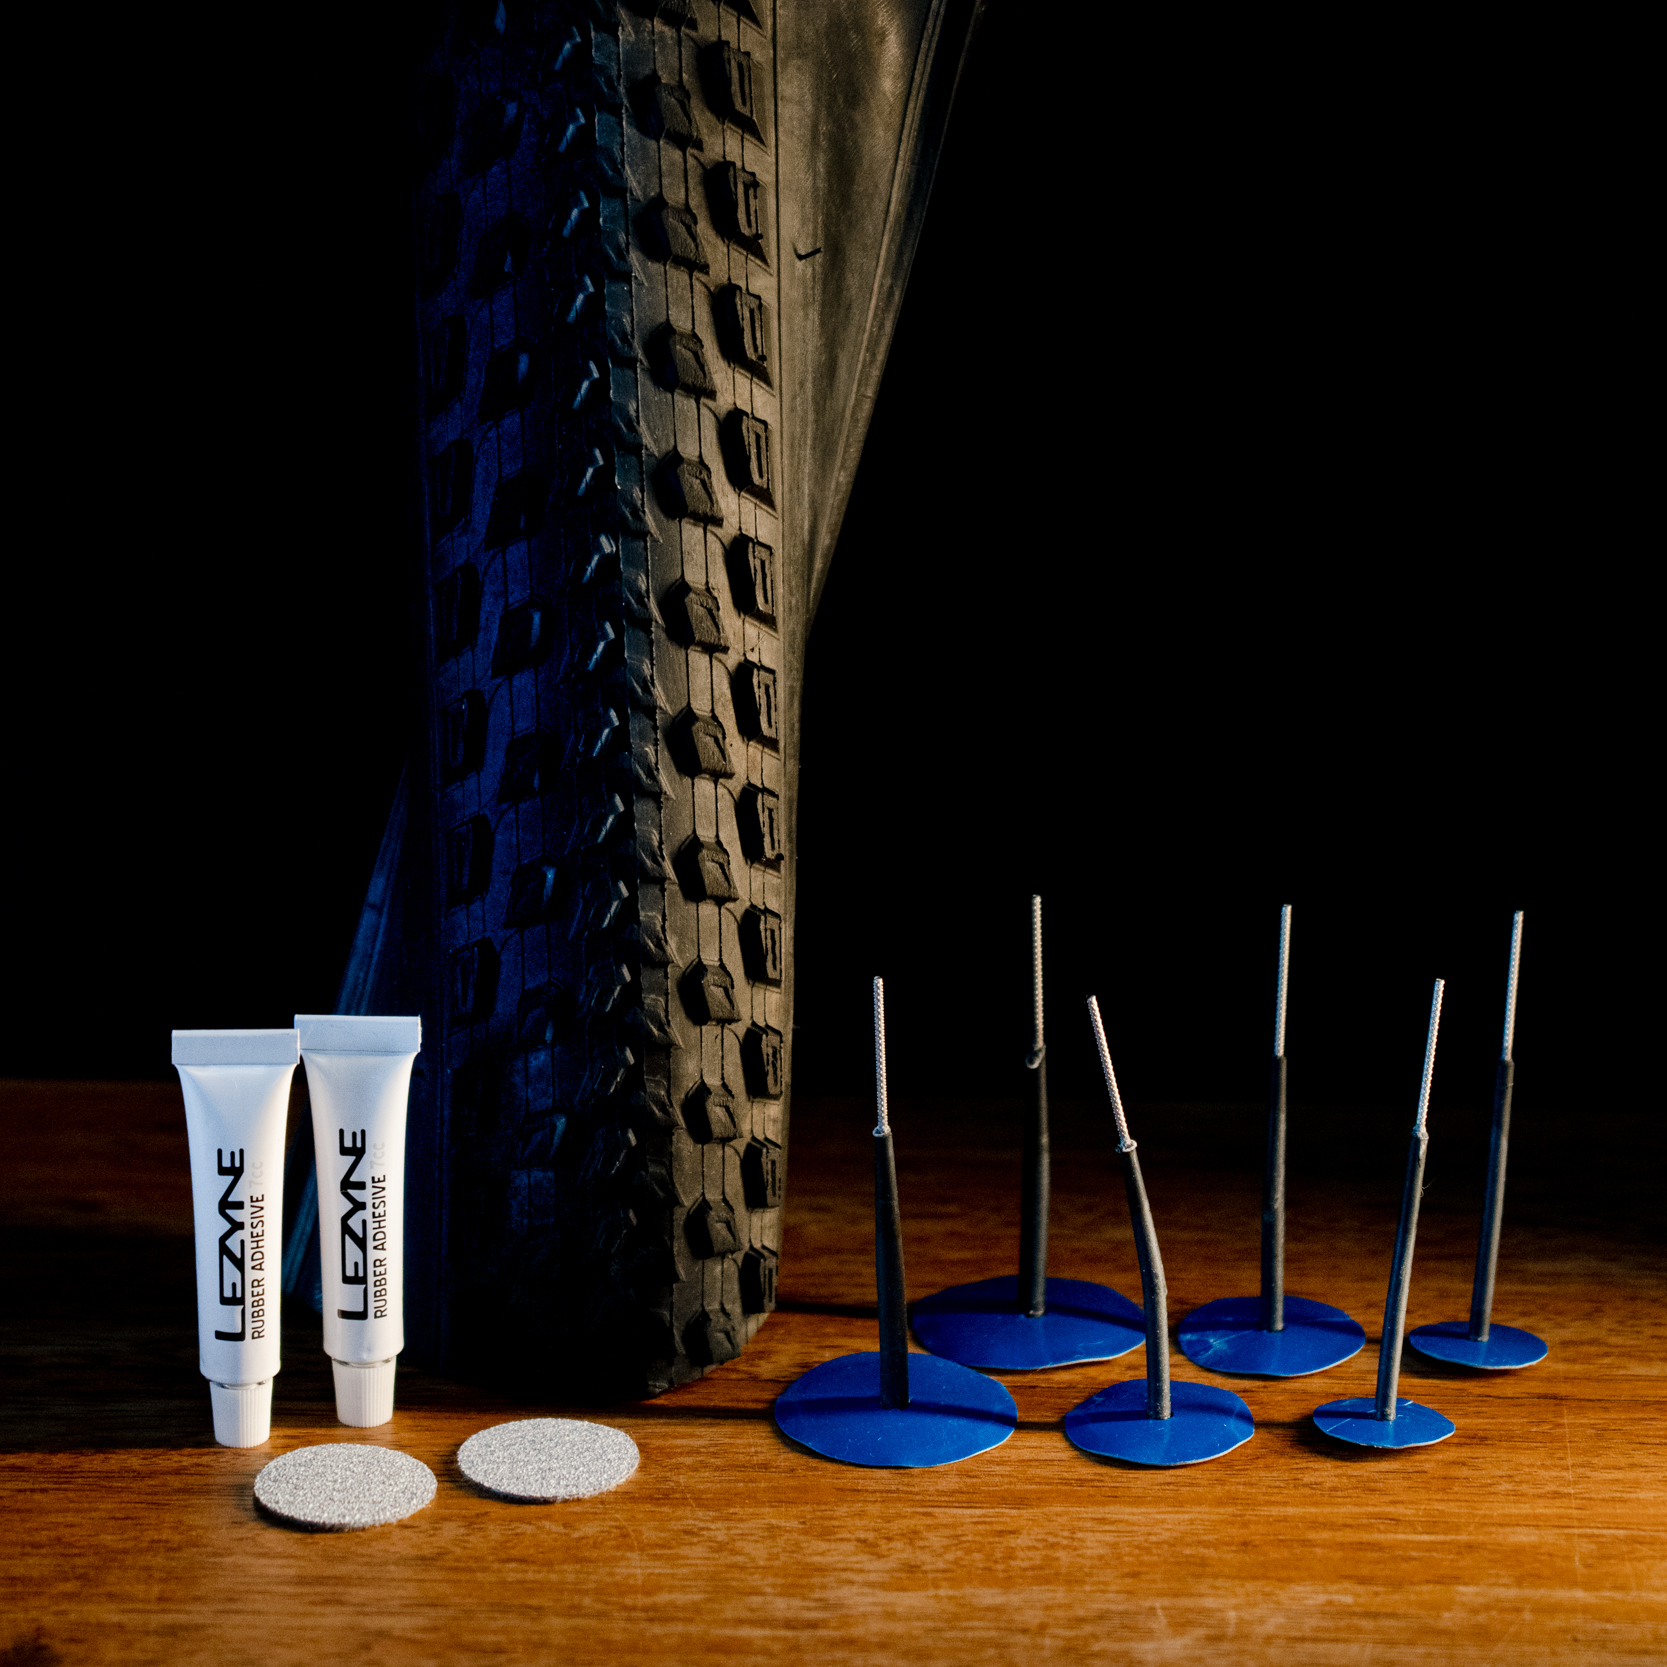 A tubeless tire patch kit in front of a bicycle tire.